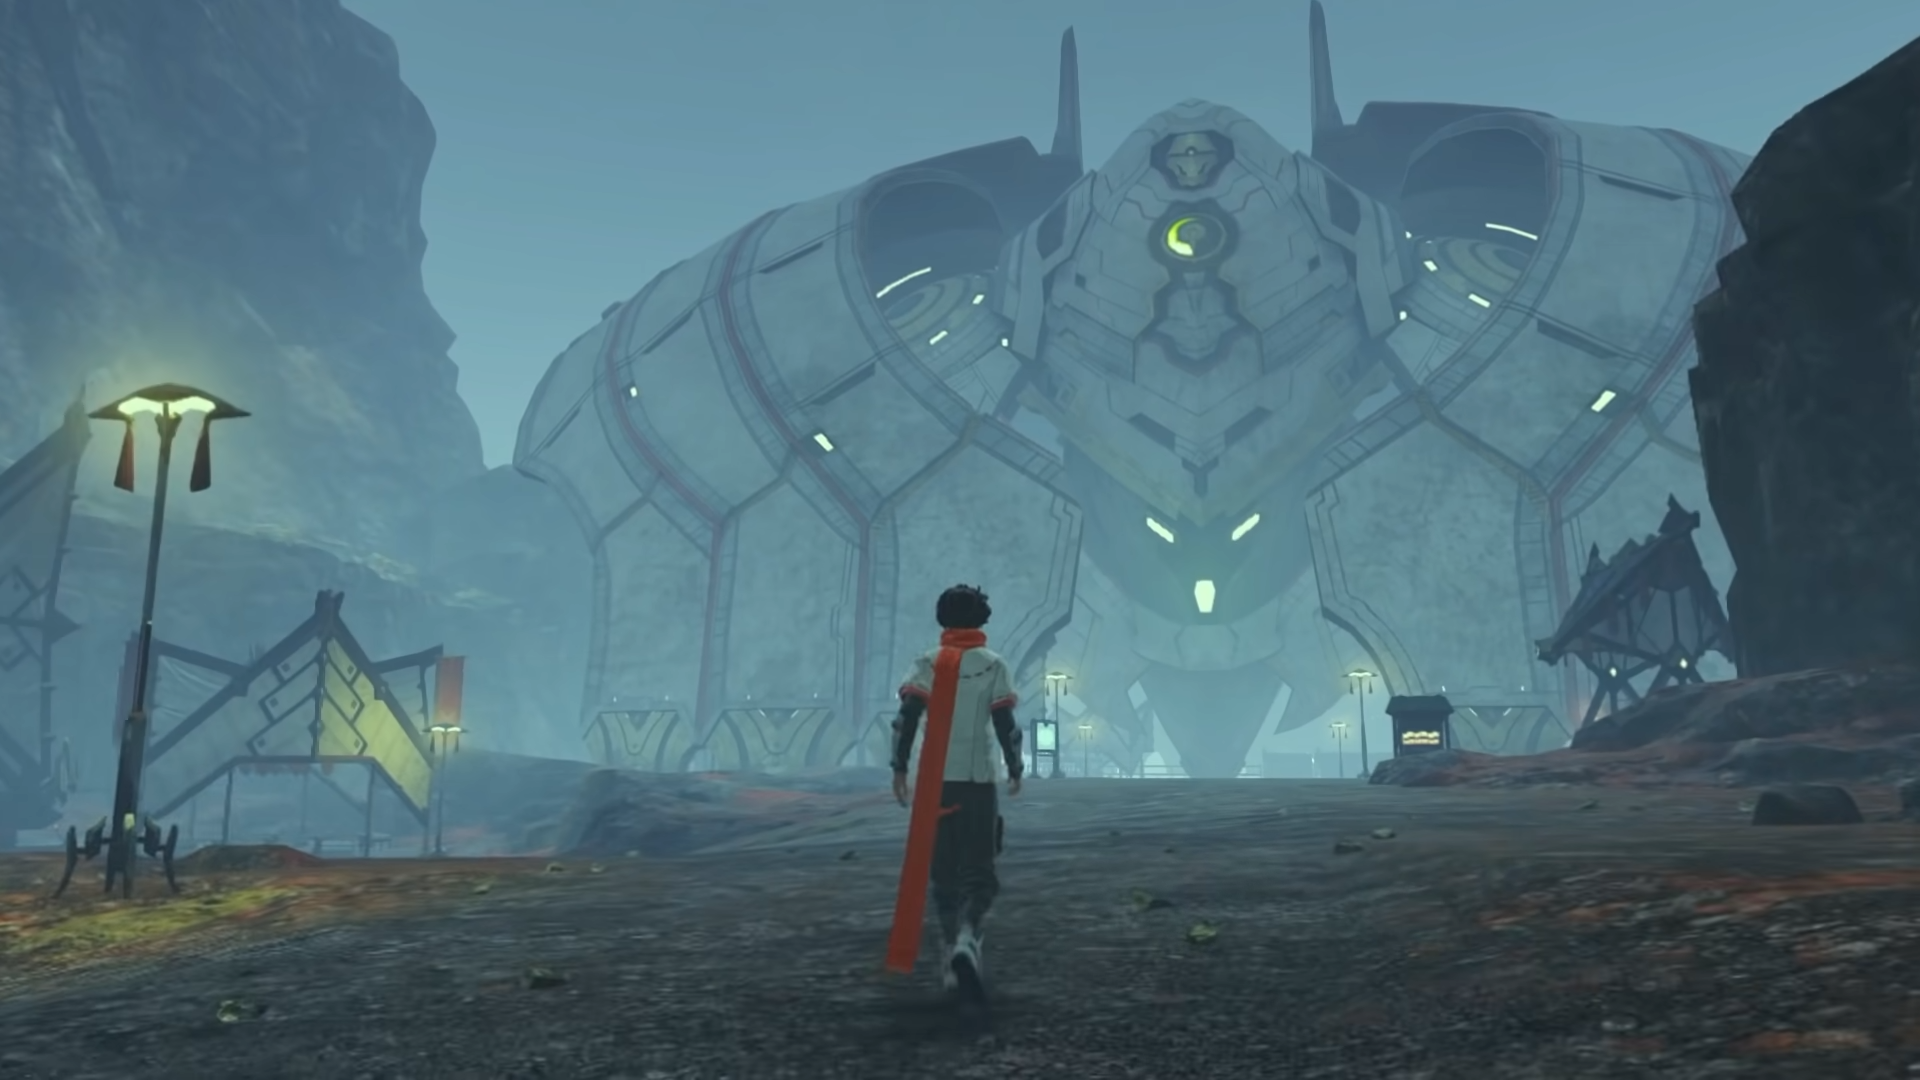 Xenoblade Chronicles 3: Release date, trailers, and more